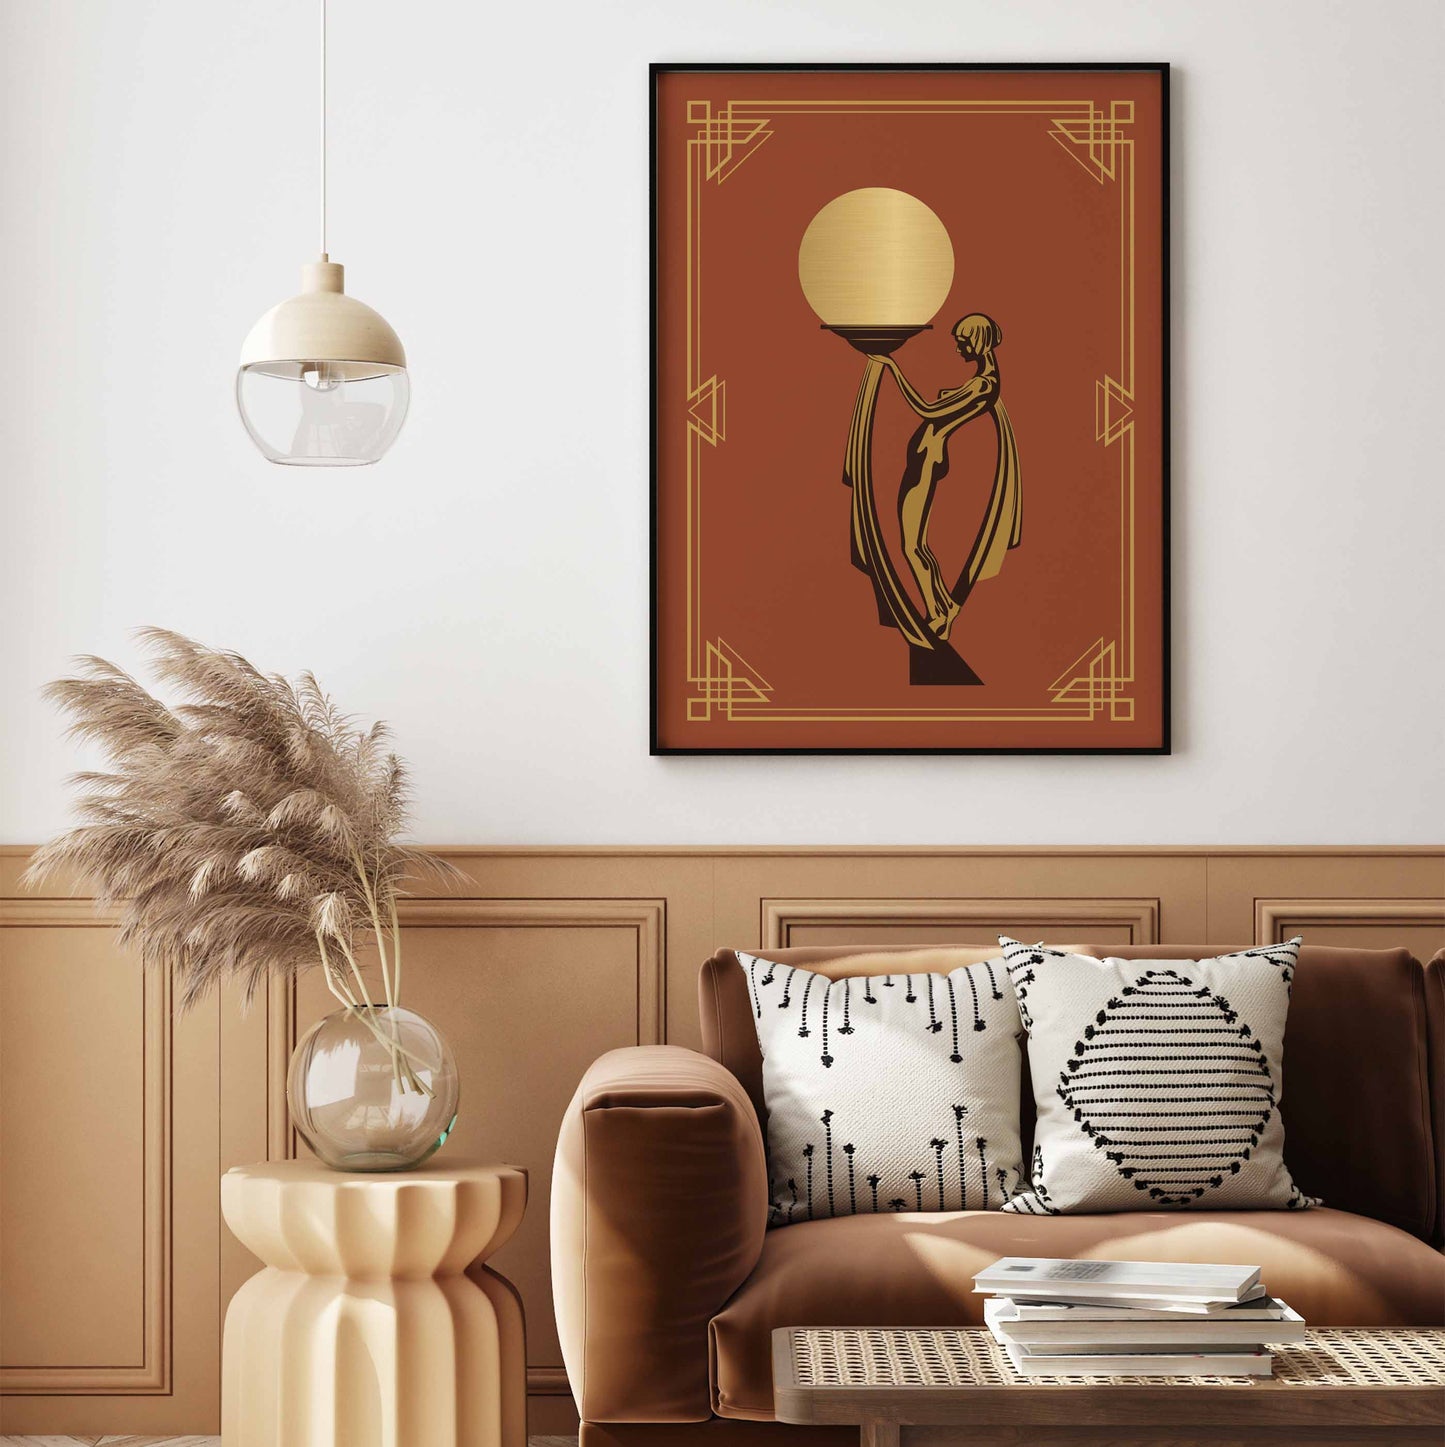 Art deco poster with a woman statue holding a golden globe